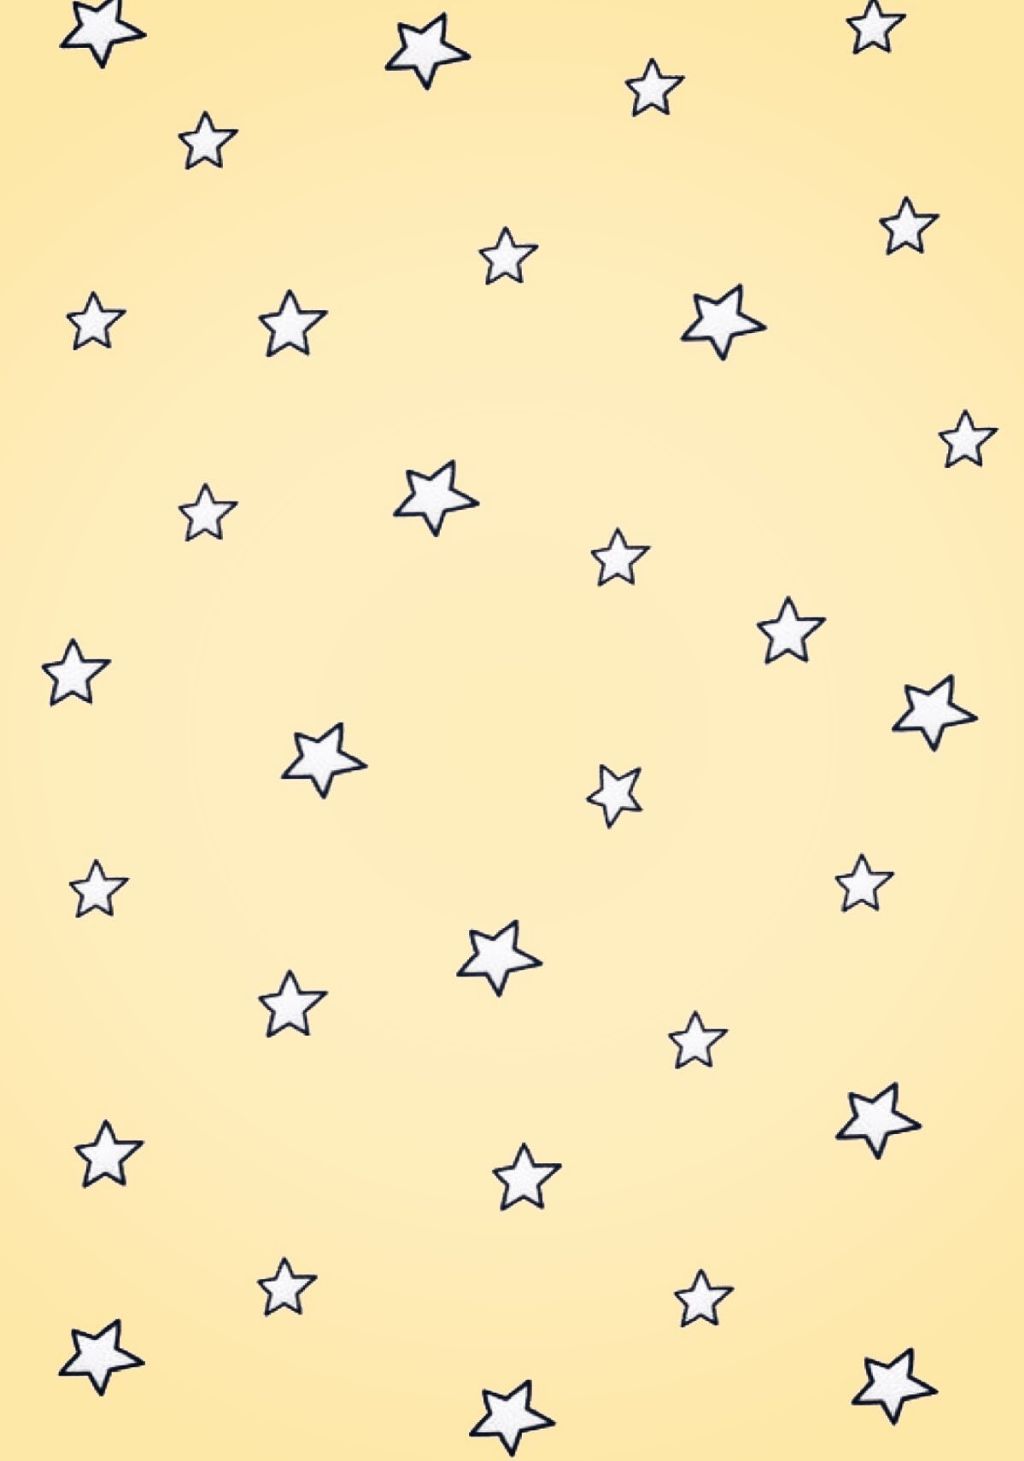 #yellow #stars #wallpaper #tumblr #background #freetoedit - Alright Dude Trip Over A Knife - HD Wallpaper 